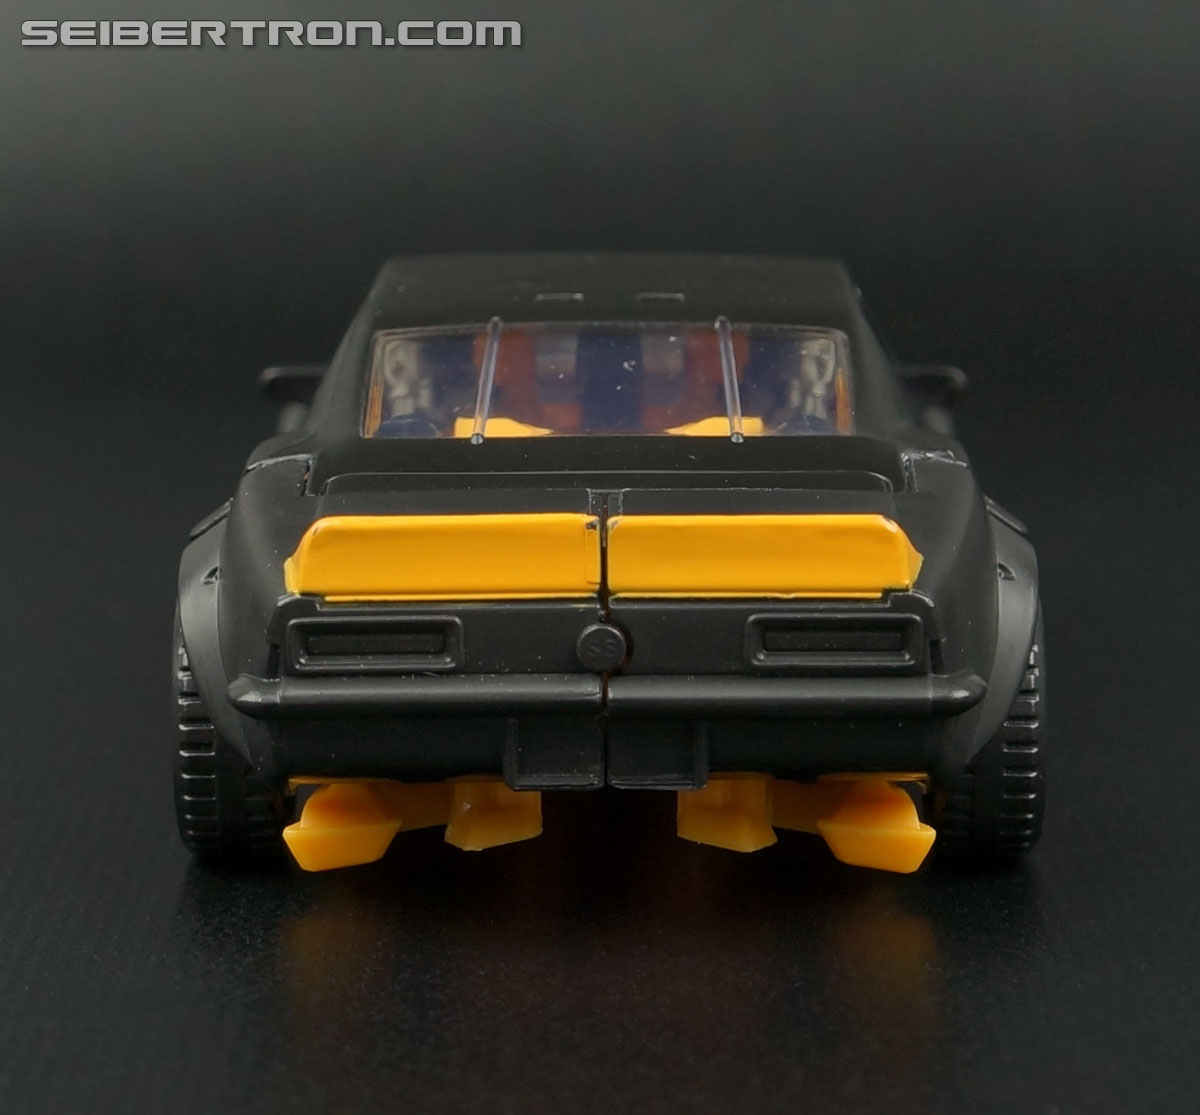 Transformers Age of Extinction: Generations High Octane Bumblebee (Image #29 of 178)